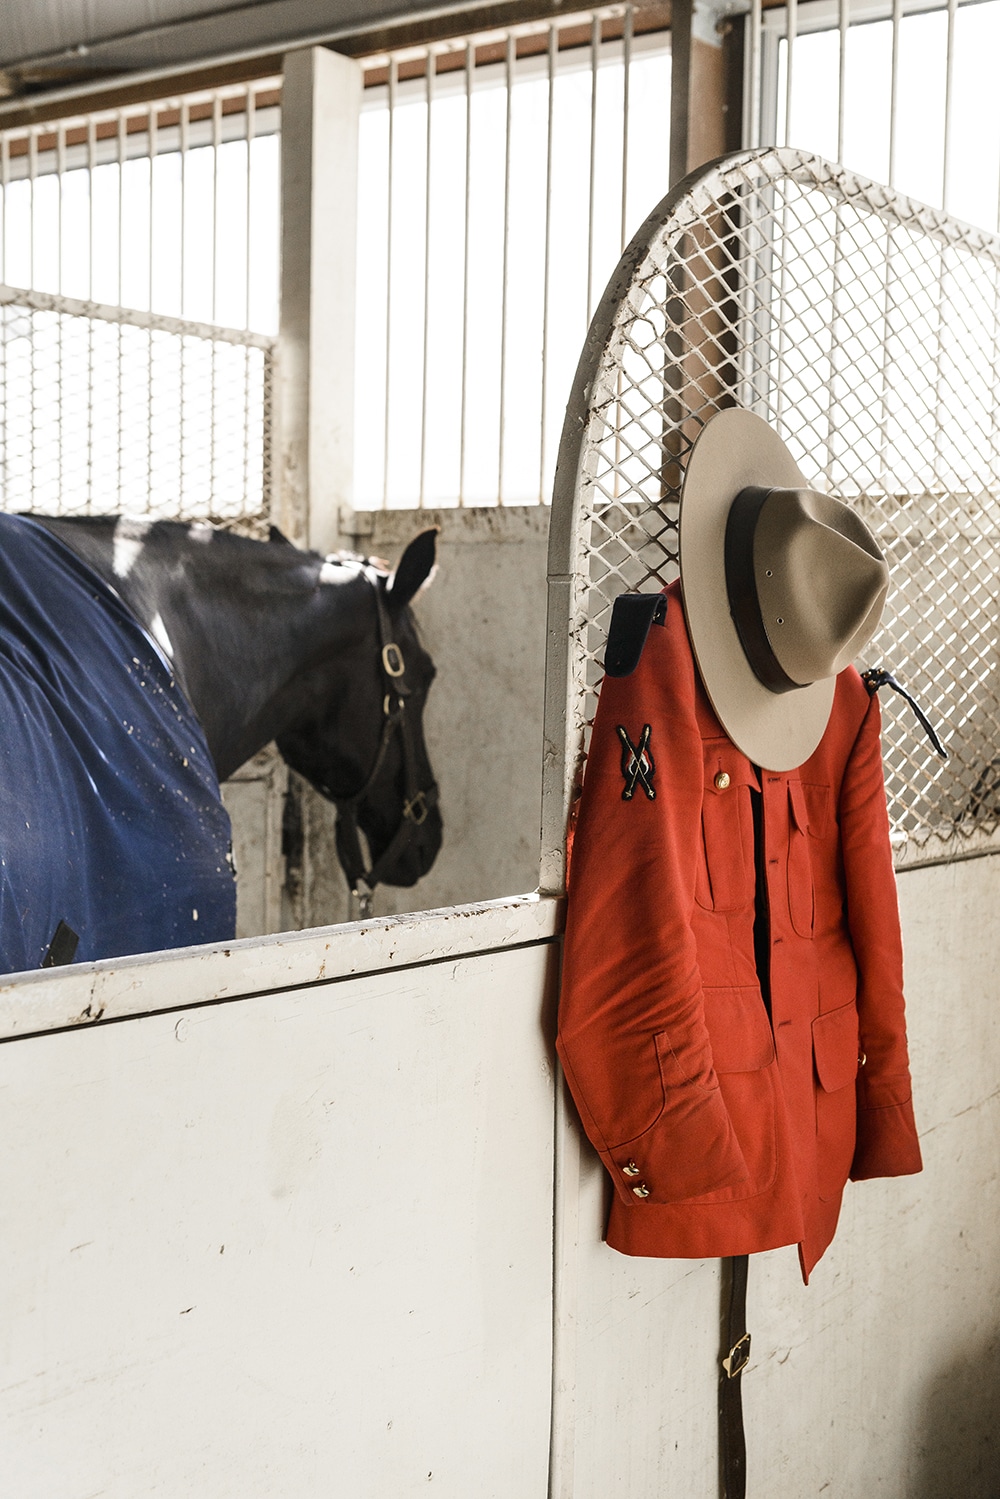 Uniform and horse of the Royal Canadian Mounted Police in the barn before they take the "stage" in the main arena.